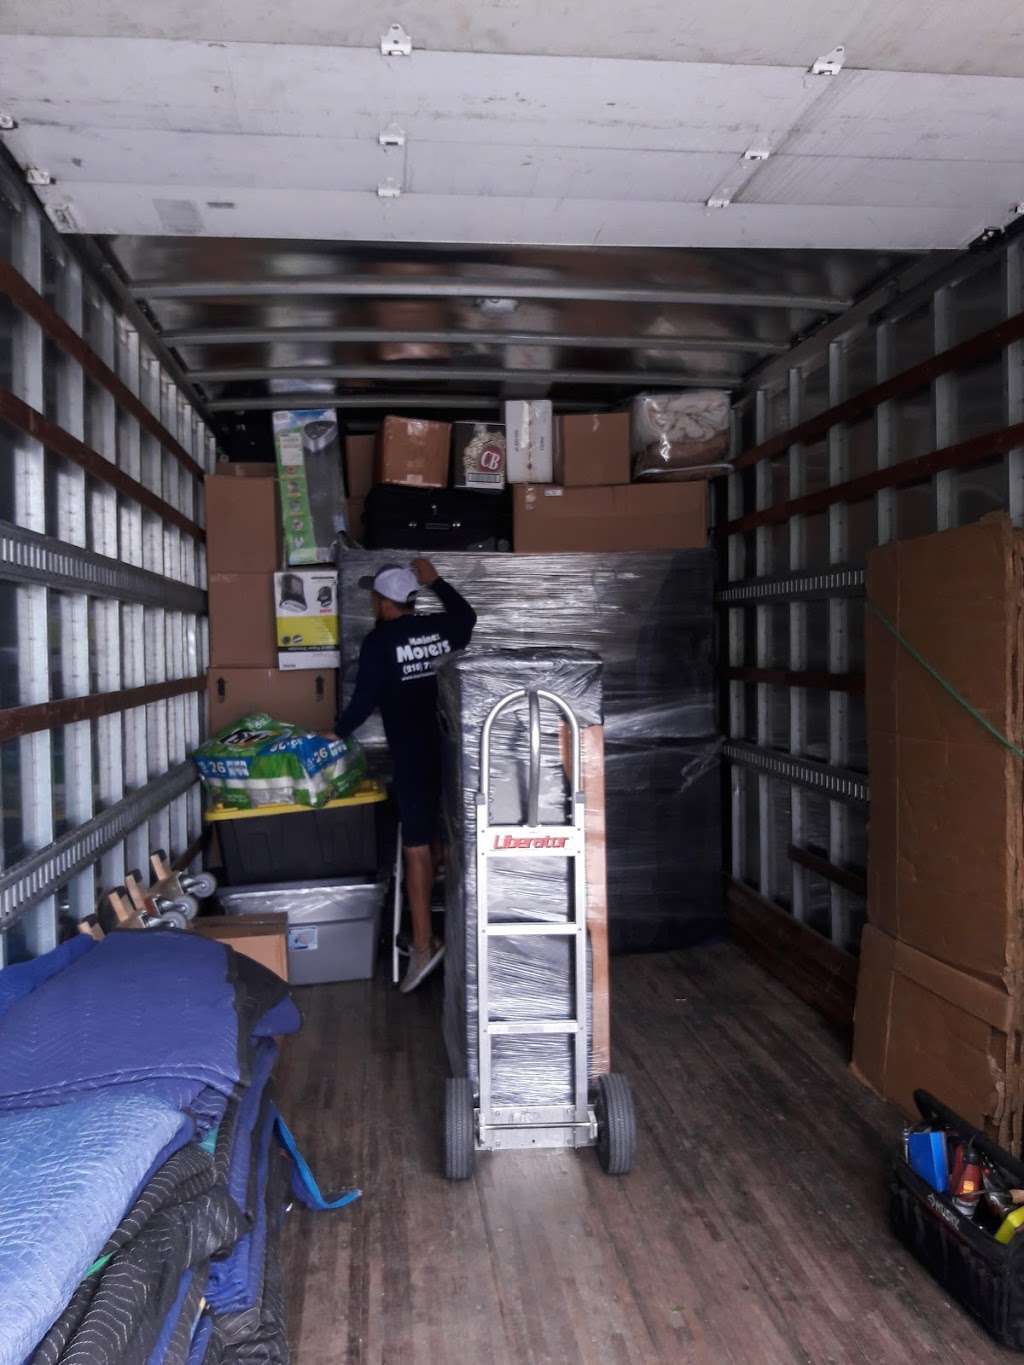 Martinez Movers is a family business offering our service in San | 515 Coleman St, San Antonio, TX 78208, USA | Phone: (210) 719-2483